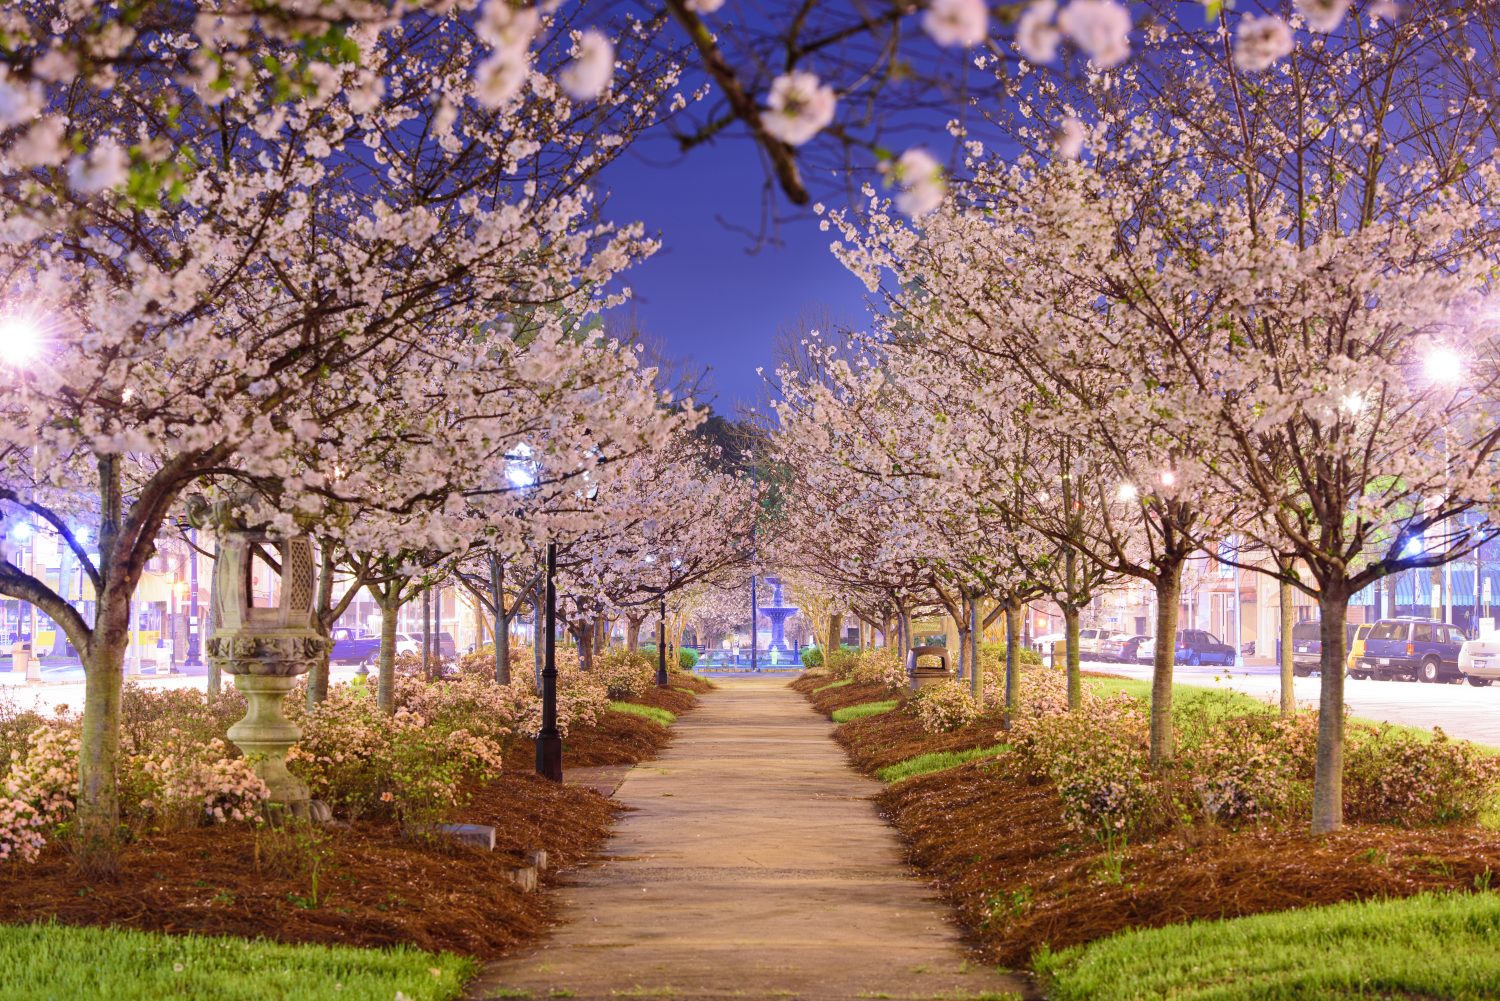 <p>Macon is also known as the "Cherry Blossom Capital of the World," thanks to its over 300,000 Yoshino cherry blossom trees that bloom every spring. The Cherry Blossom Trail takes visitors along the best route to view these delicate blooms.</p><p>Sharks, lions, alligators, and more! Don’t miss today’s latest and most exciting animal news. <strong><a href="https://www.msn.com/en-us/channel/source/AZ%20Animals%20US/sr-vid-7etr9q8xun6k6508c3nufaum0de3dqktiq6h27ddeagnfug30wka">Click here to access the A-Z Animals profile page</a> and be sure to hit the <em>Follow</em> button here or at the top of this article!</strong></p> <p>Have feedback? Add a comment below!</p>